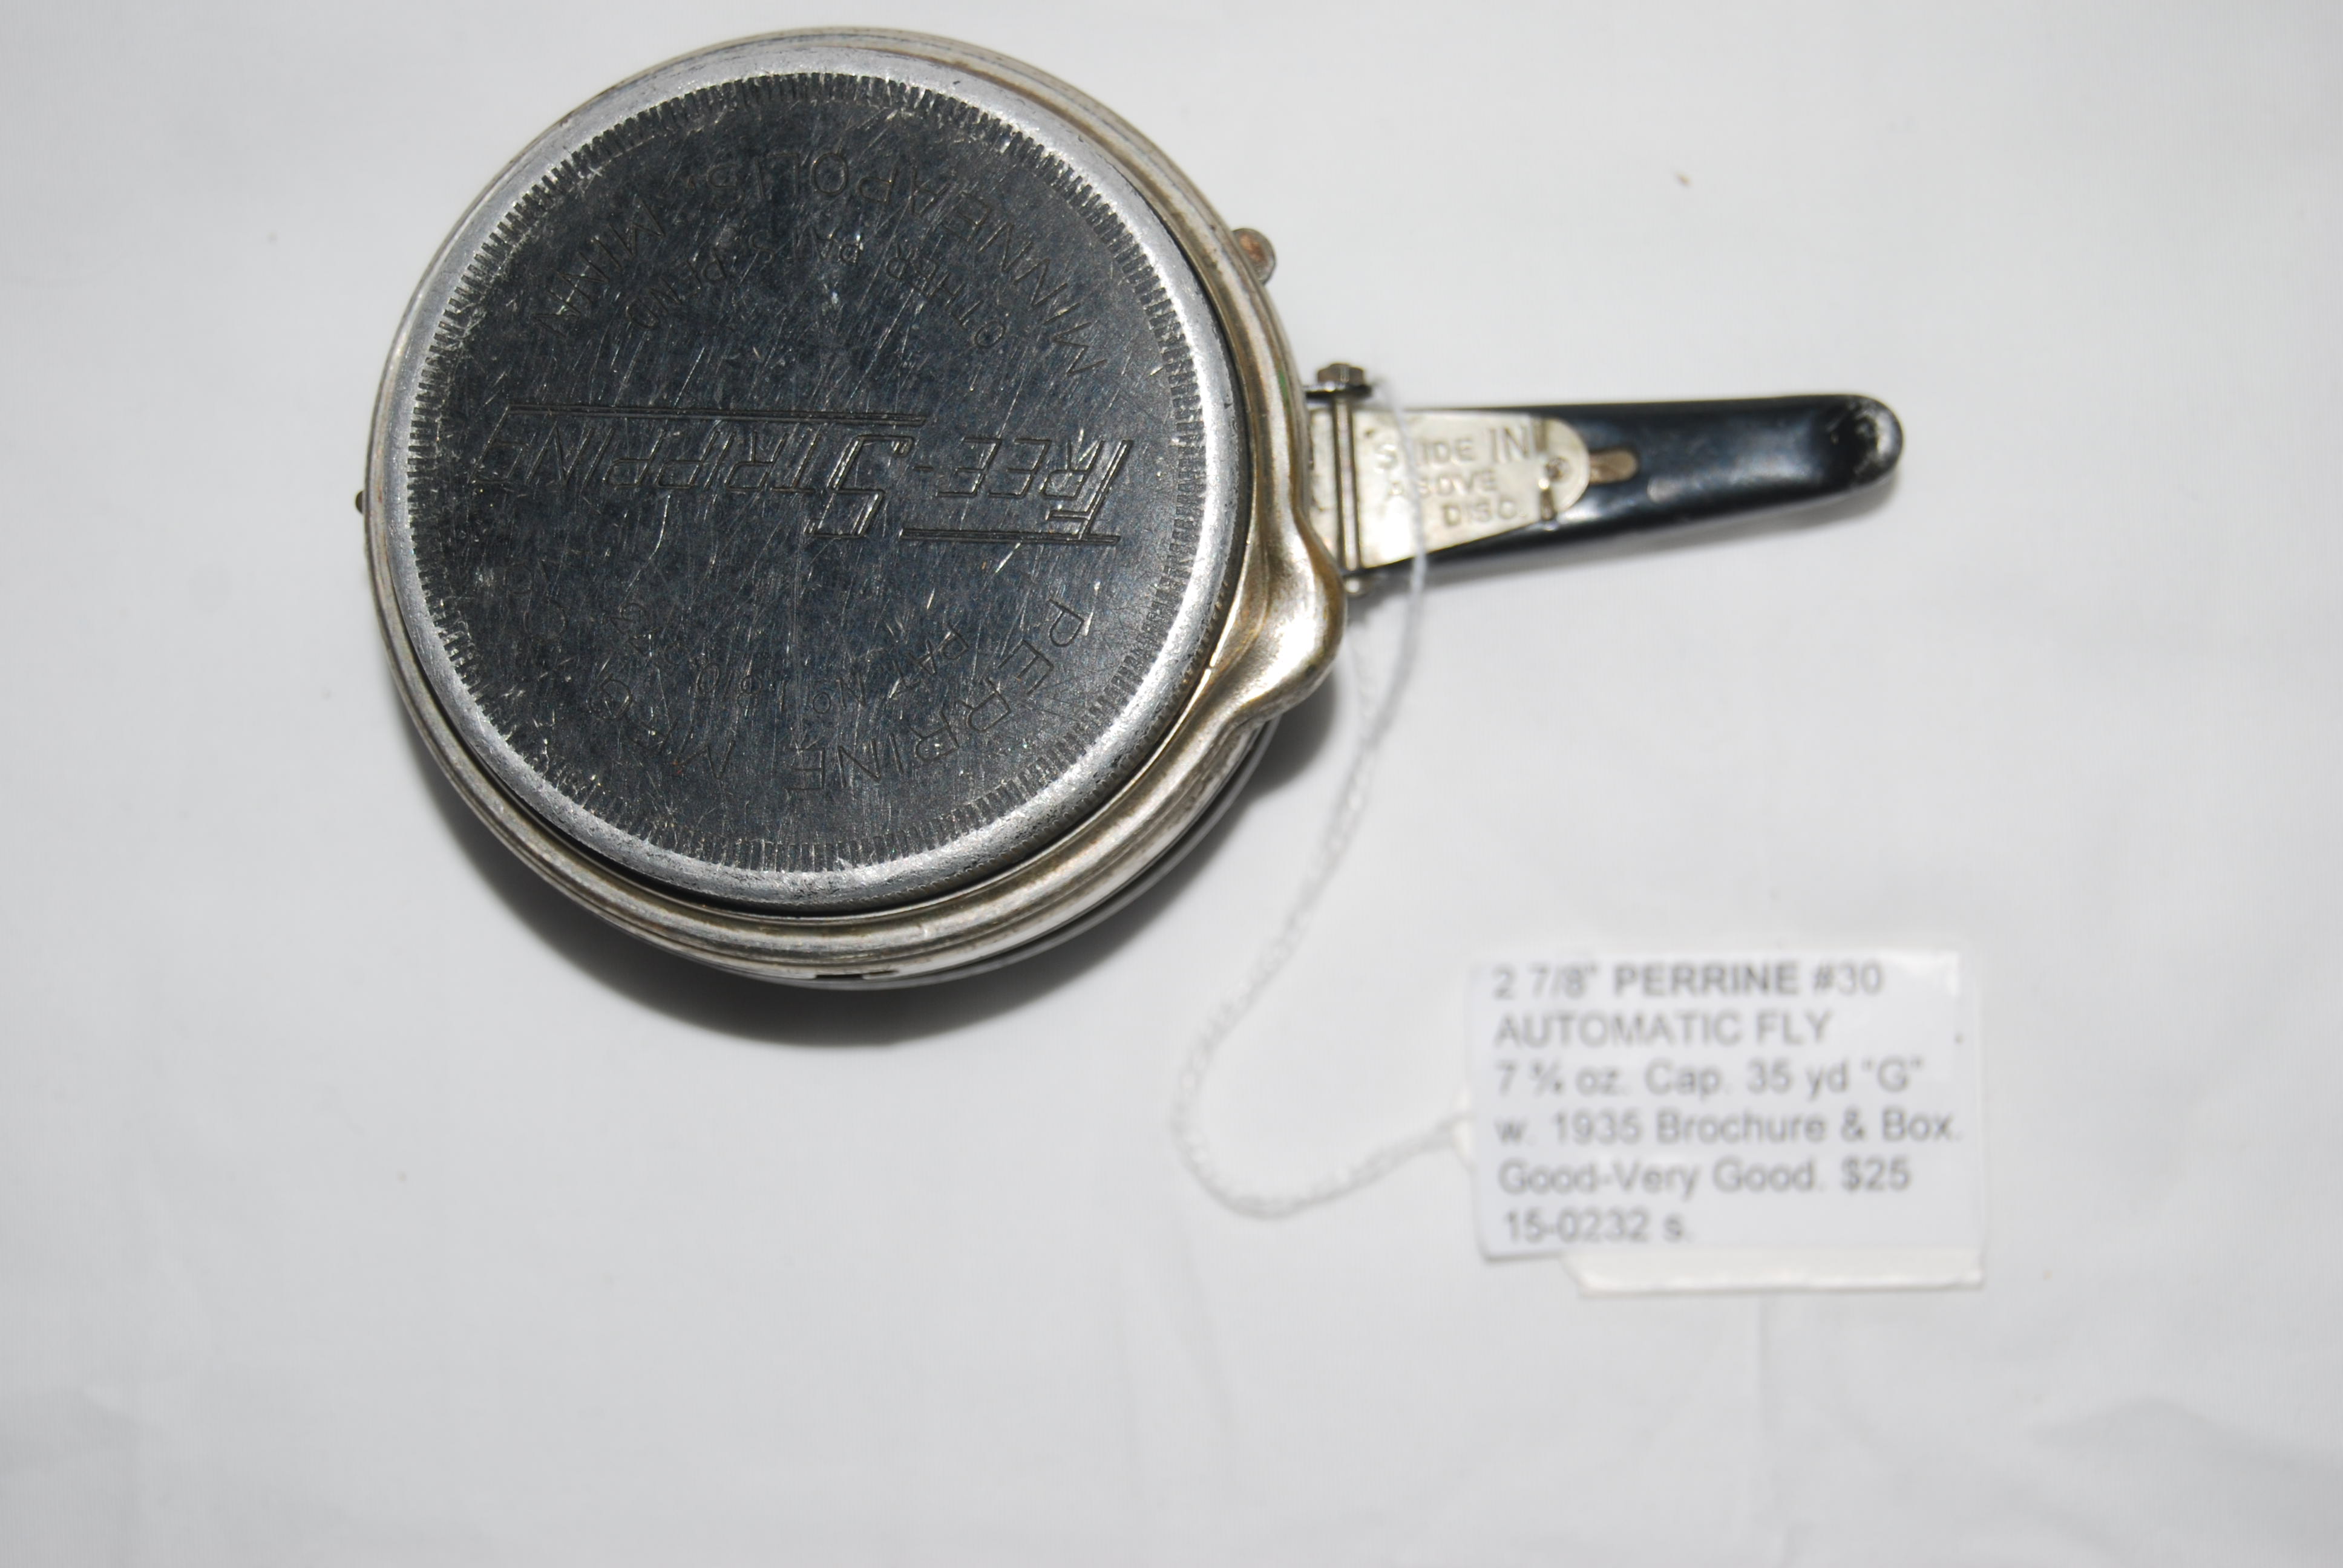 2 7/8” PERRINE NO. 30 FREE STRIPPING AUTOMATIC FLY REEL. 7 ¾ oz. Capacity  35 yd. “G” line. In original Box with Perrine Circular No. 40 dated May  1935.